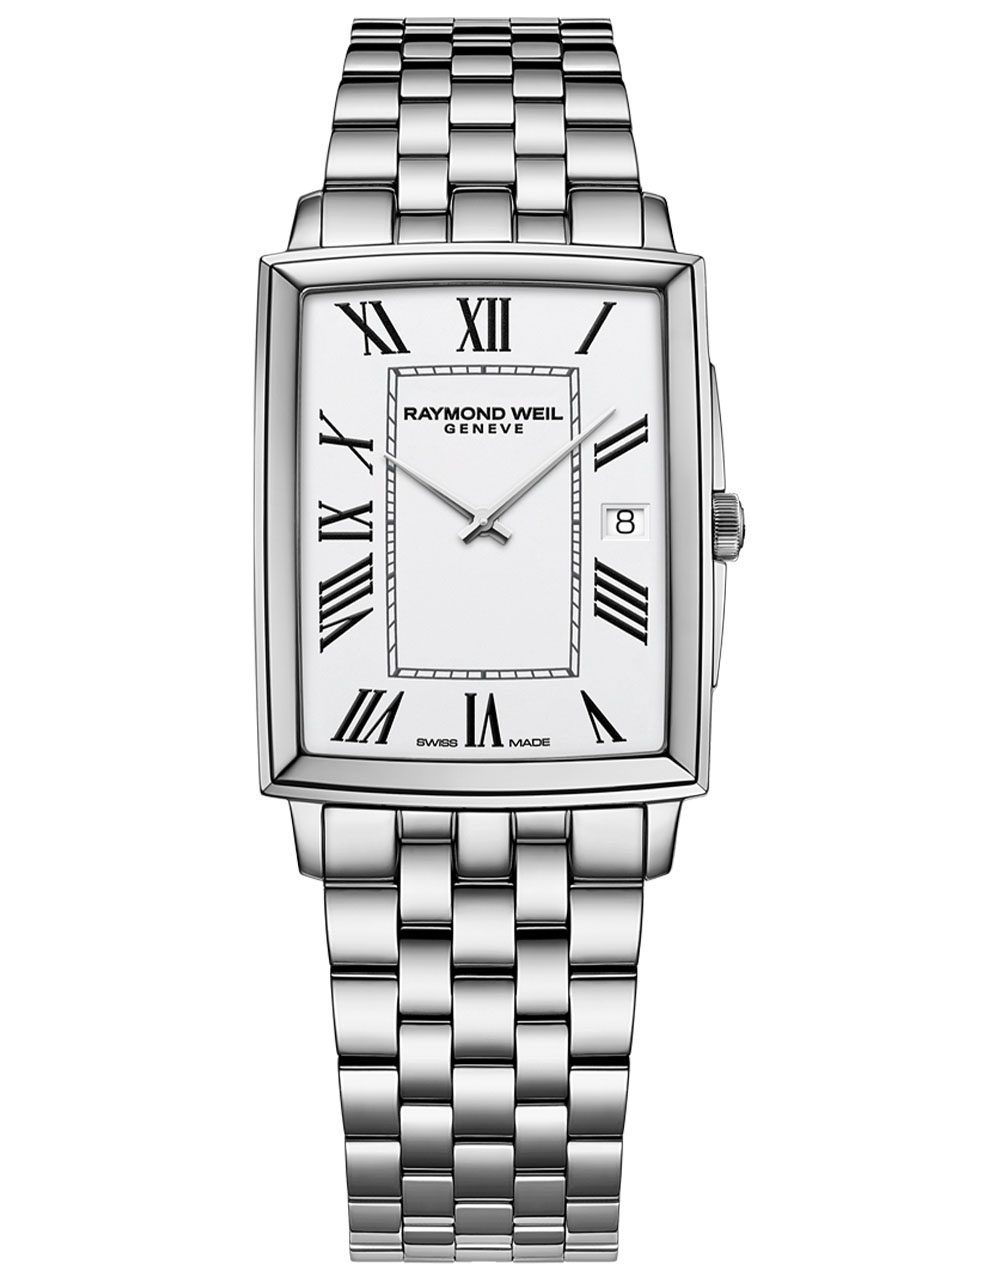 Raymond Weil Toccata Men's Classic Rectangular Stainless Steel Watch, 37 x 29 mm (5425-ST-00300)
Stainless steel bracelet, White dial, Black Roman numerals